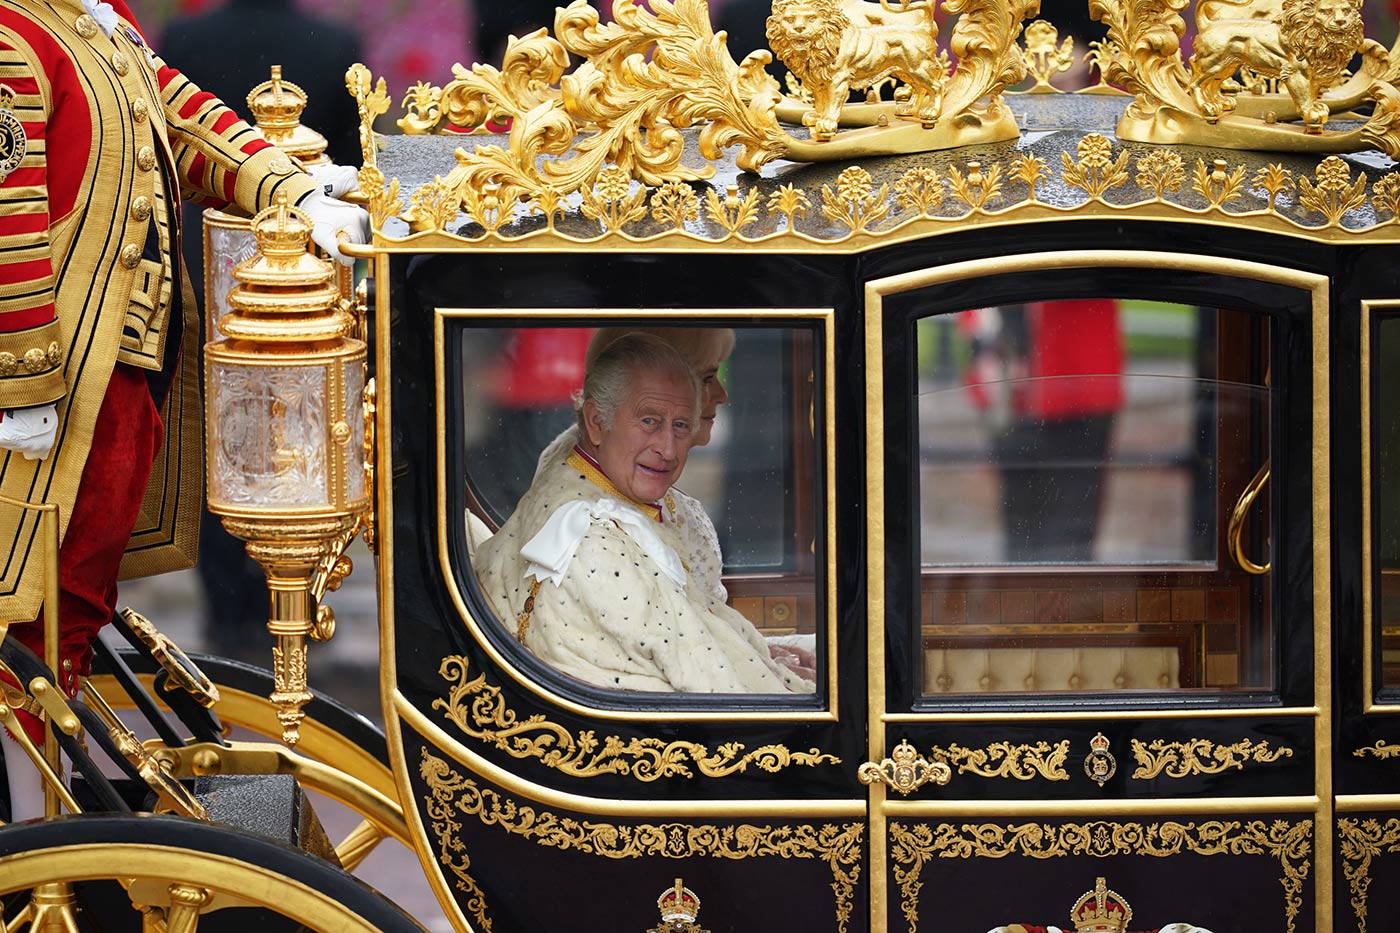 King Charles smiles as the carriage leaves Buckingham Palace and heads down The Mall